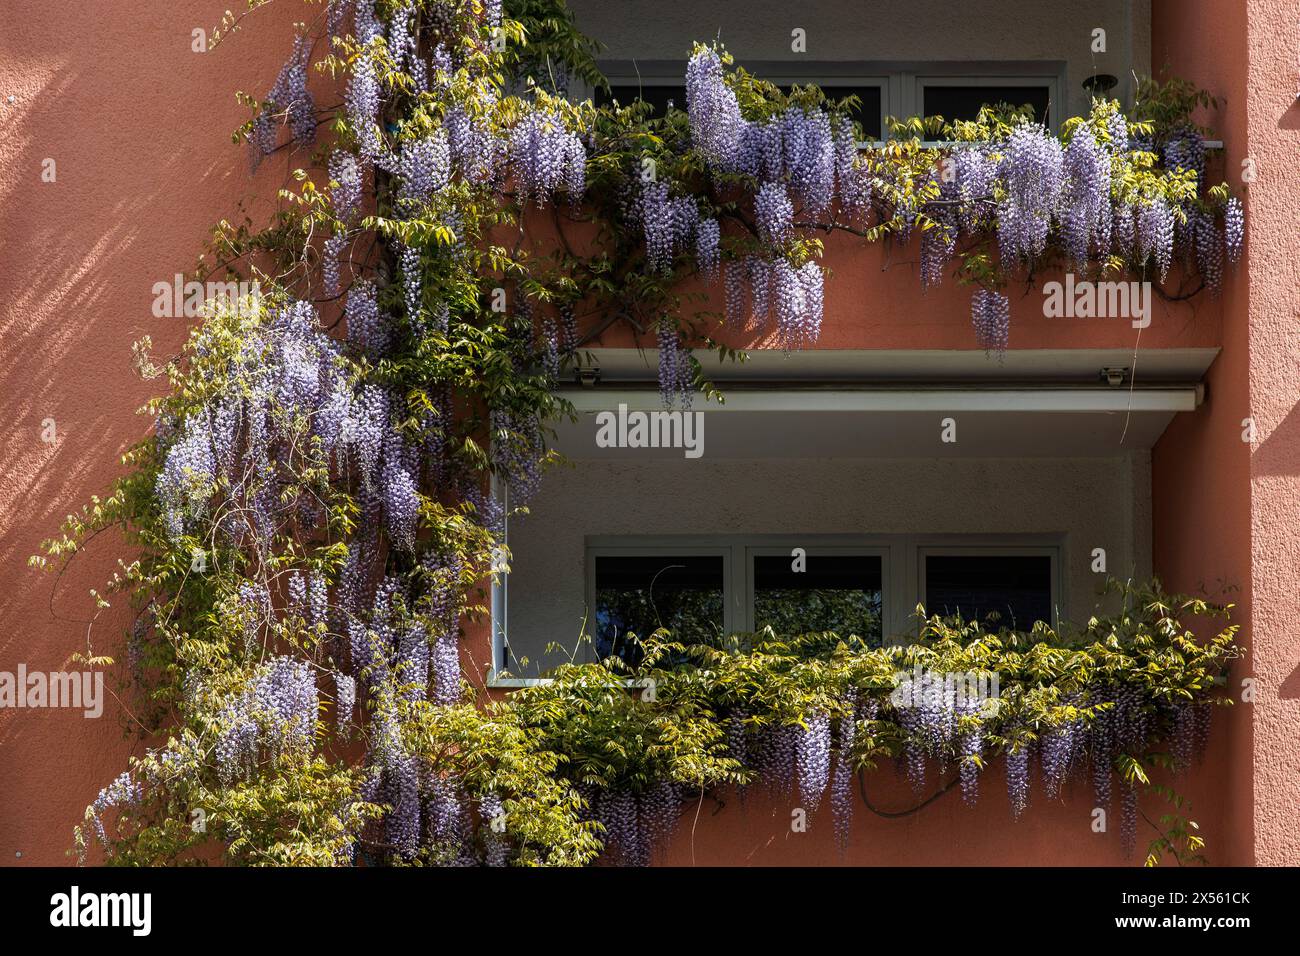 blooming wisteria (lat. Wisteria) on a facade on Vogtei street, Cologne, Germany. bluehende Glyzinie (lat. Wisteria) an einer Fassade an der Vogteistr Stock Photo